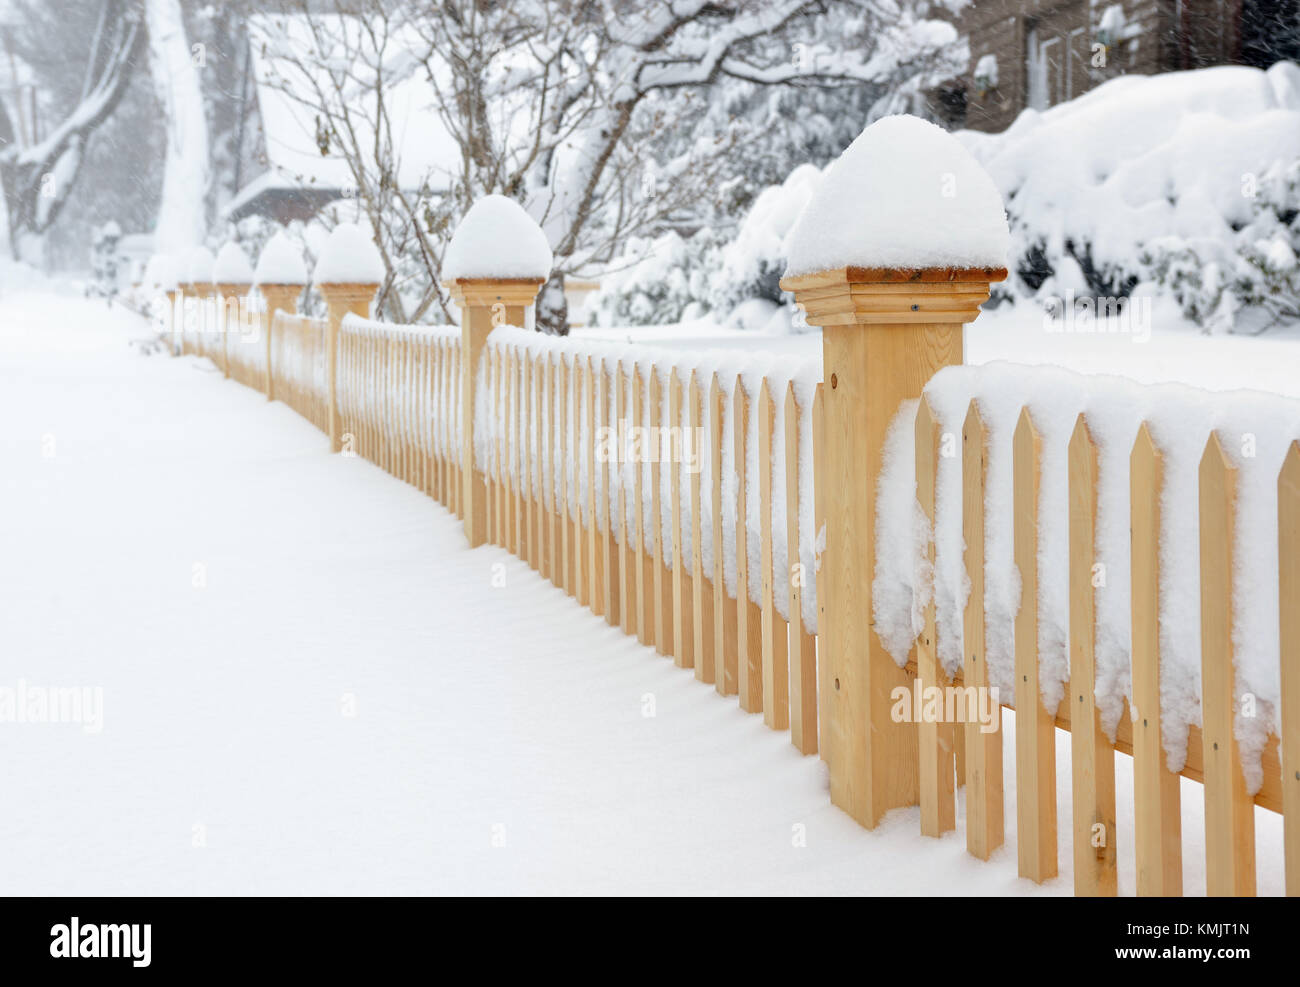 Garden fence, sidewalk and plants covered in snow during a winter storm Stock Photo